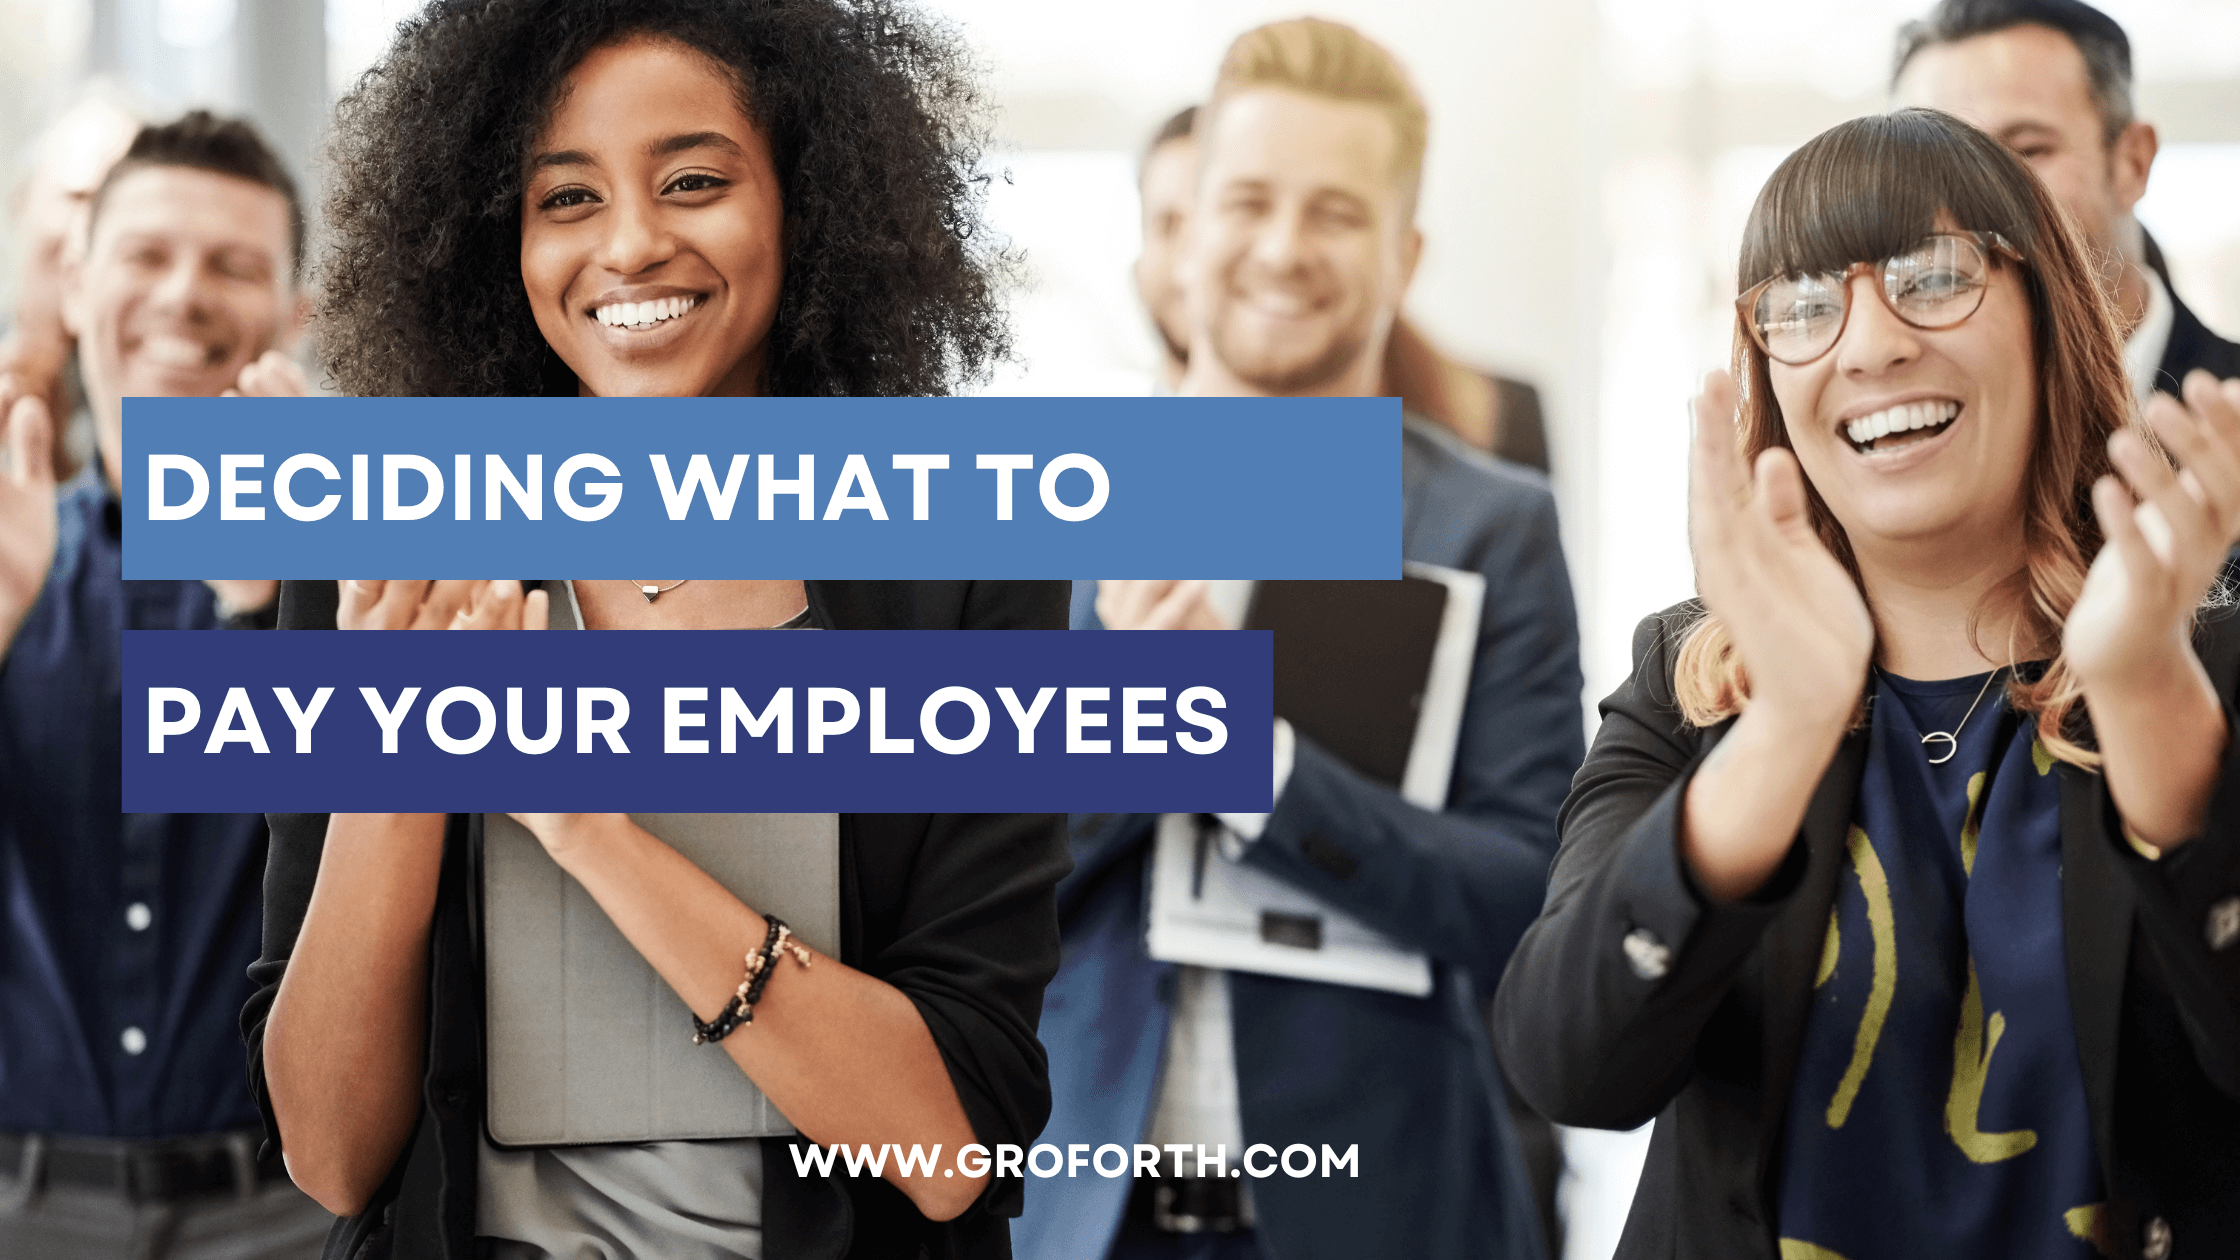 How to decide what to pay employees?